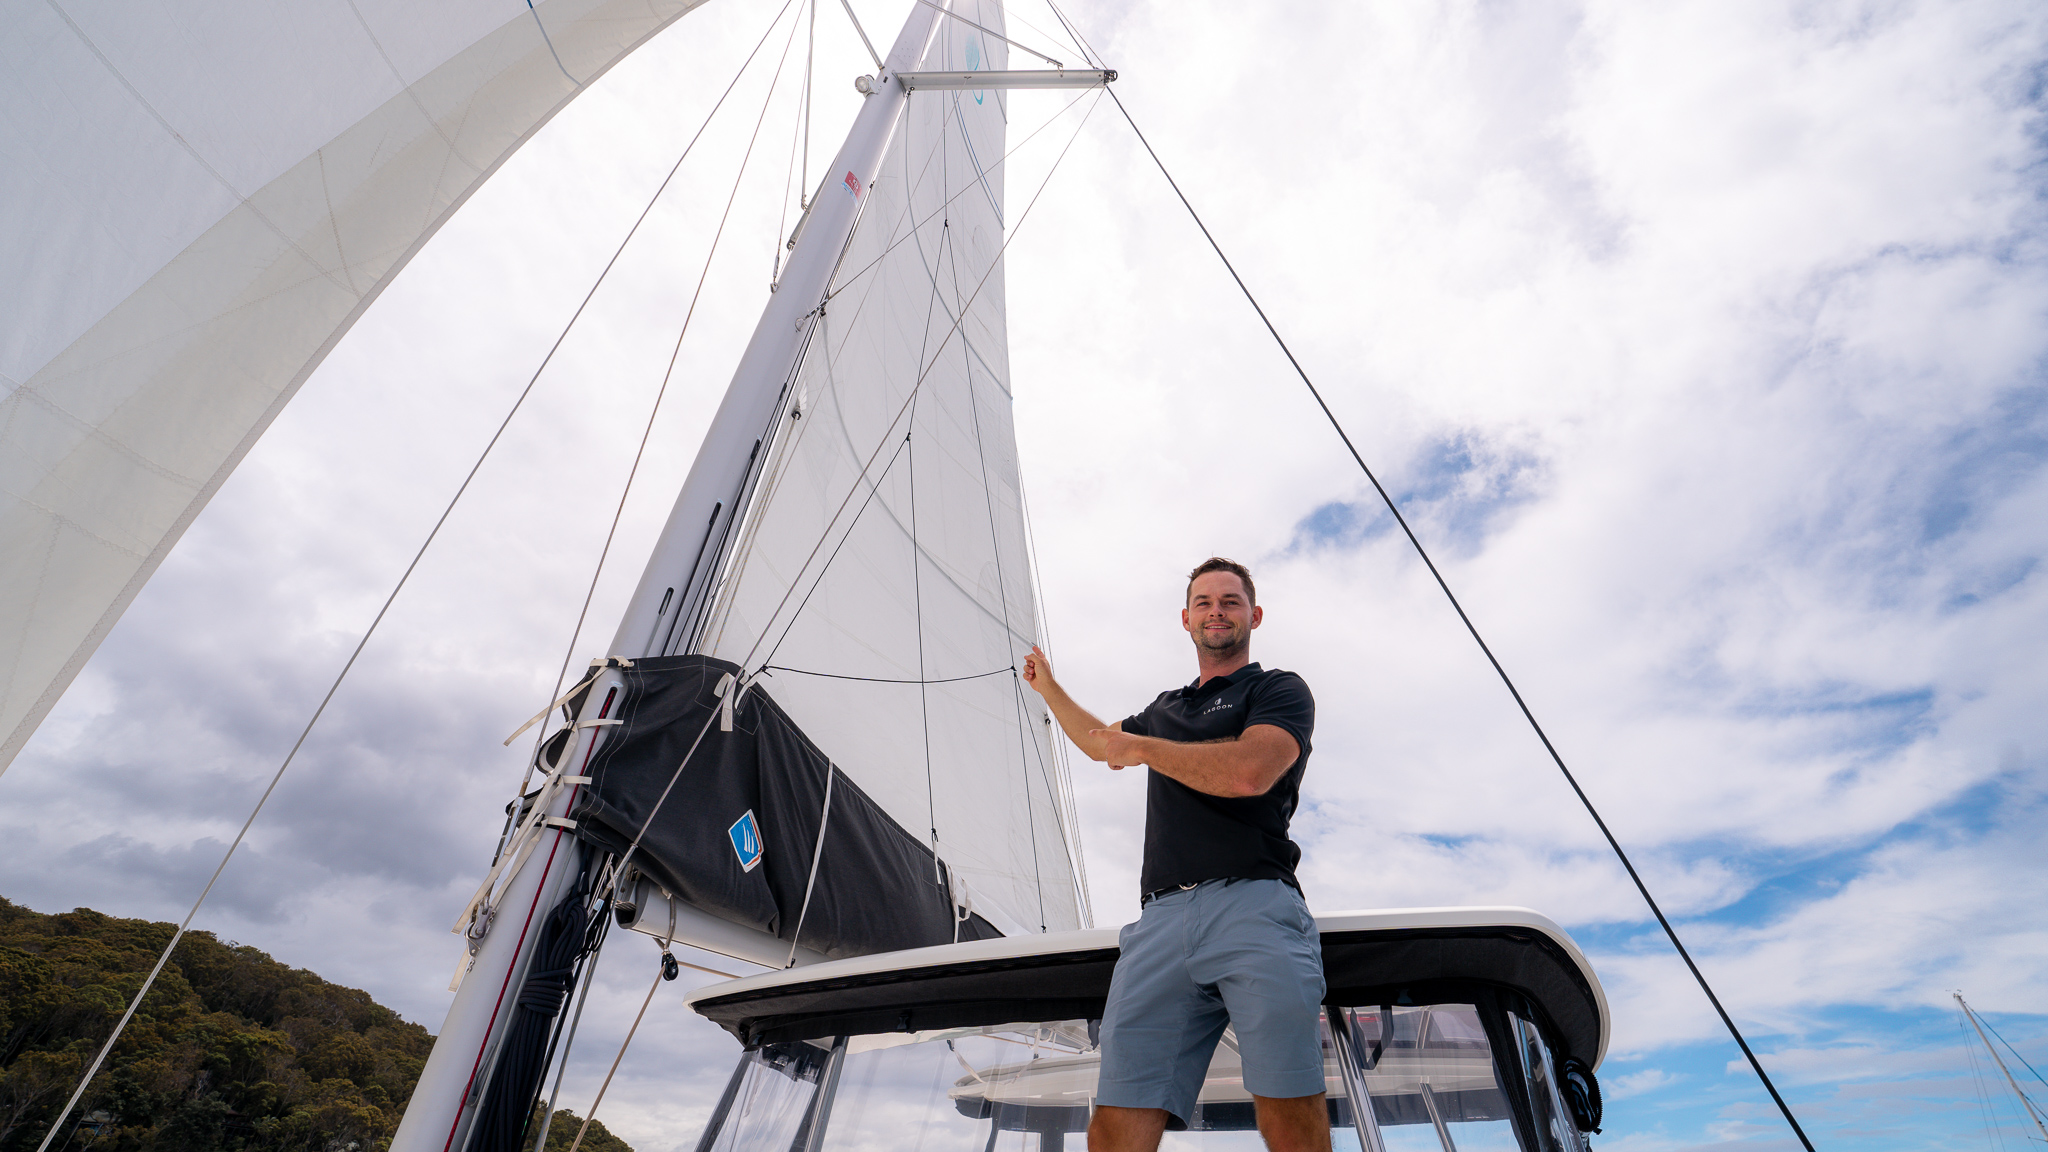 How to Lower the Mainsail